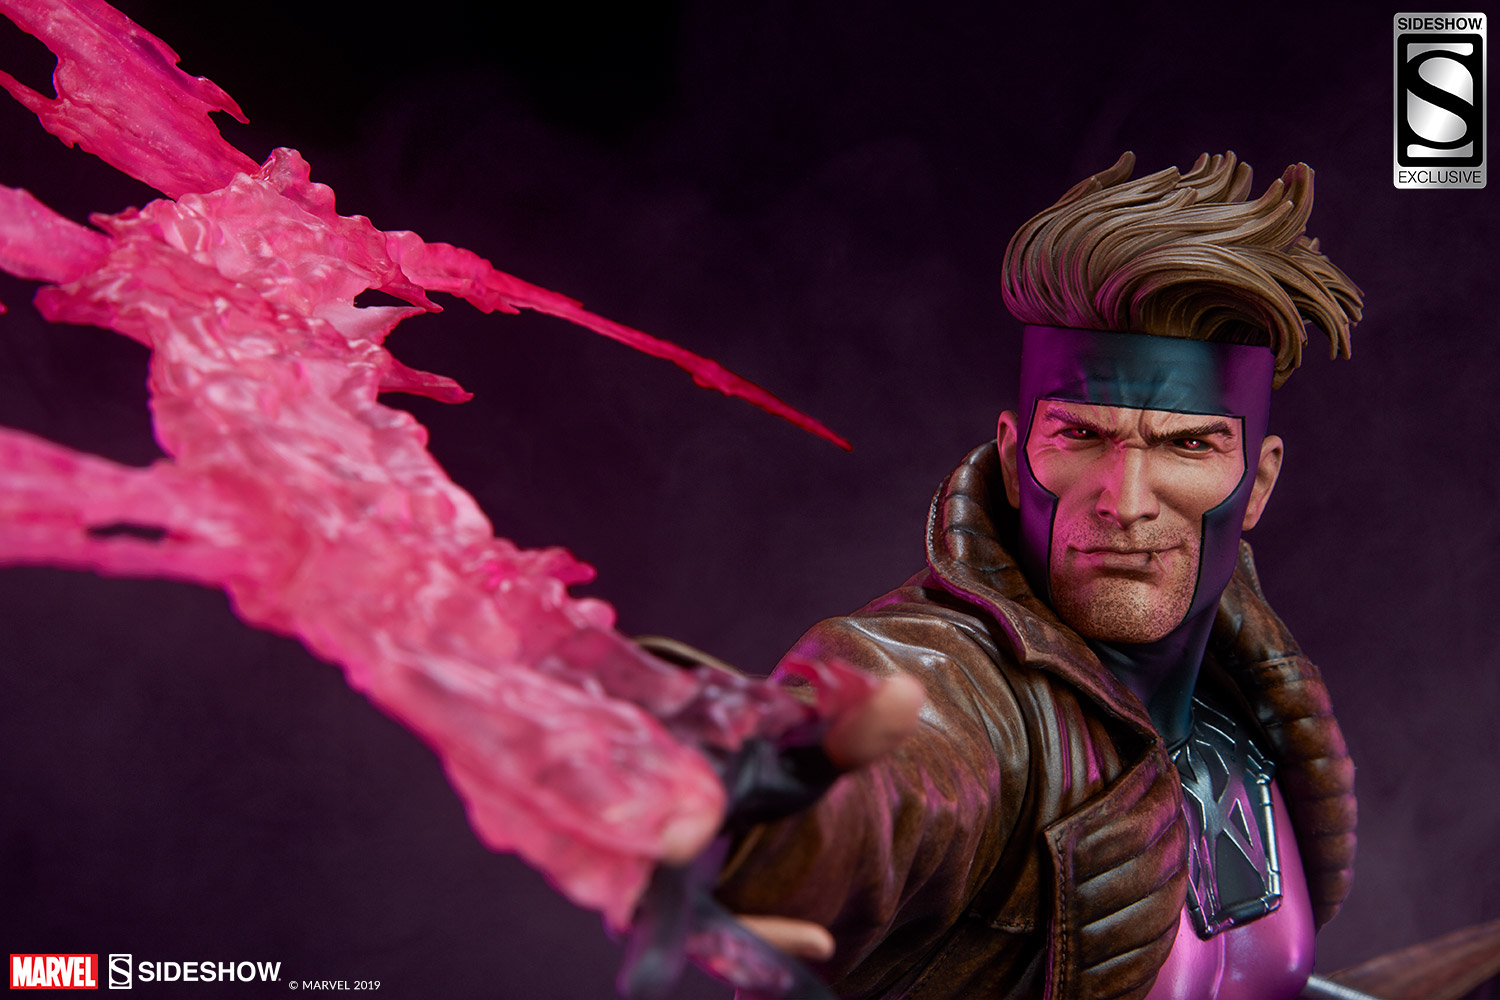 https://www.sideshow.com/storage/product-images/3007271/gambit_marvel_gallery_5d66e820c74ef.jpg